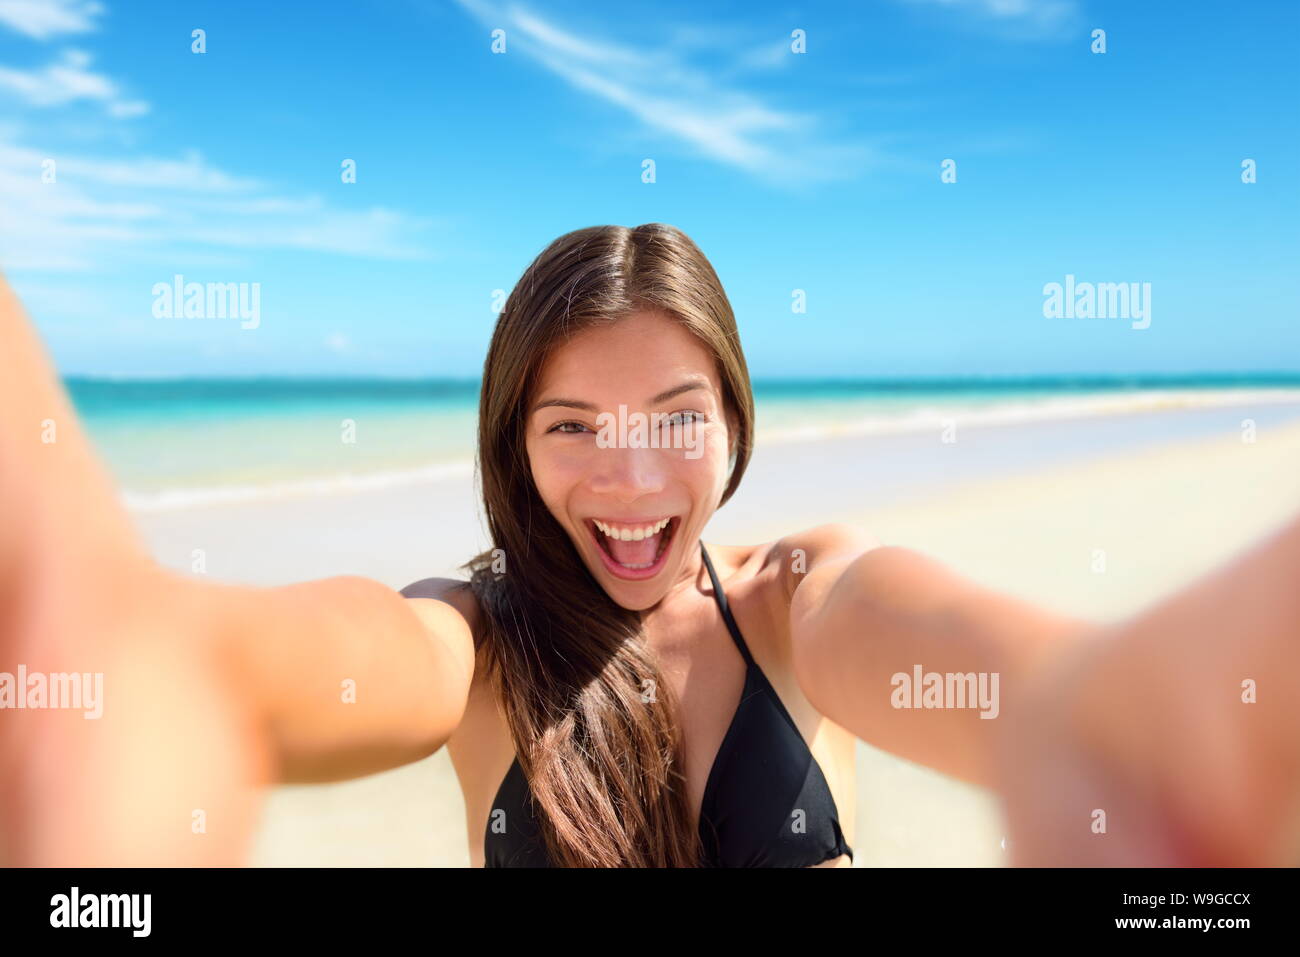 Selfie fun woman taking photo at beach vacation. Summer holiday girl happy at smartphone camera taking self-portrait on her travel vacations on pristine paradise beach. Stock Photo